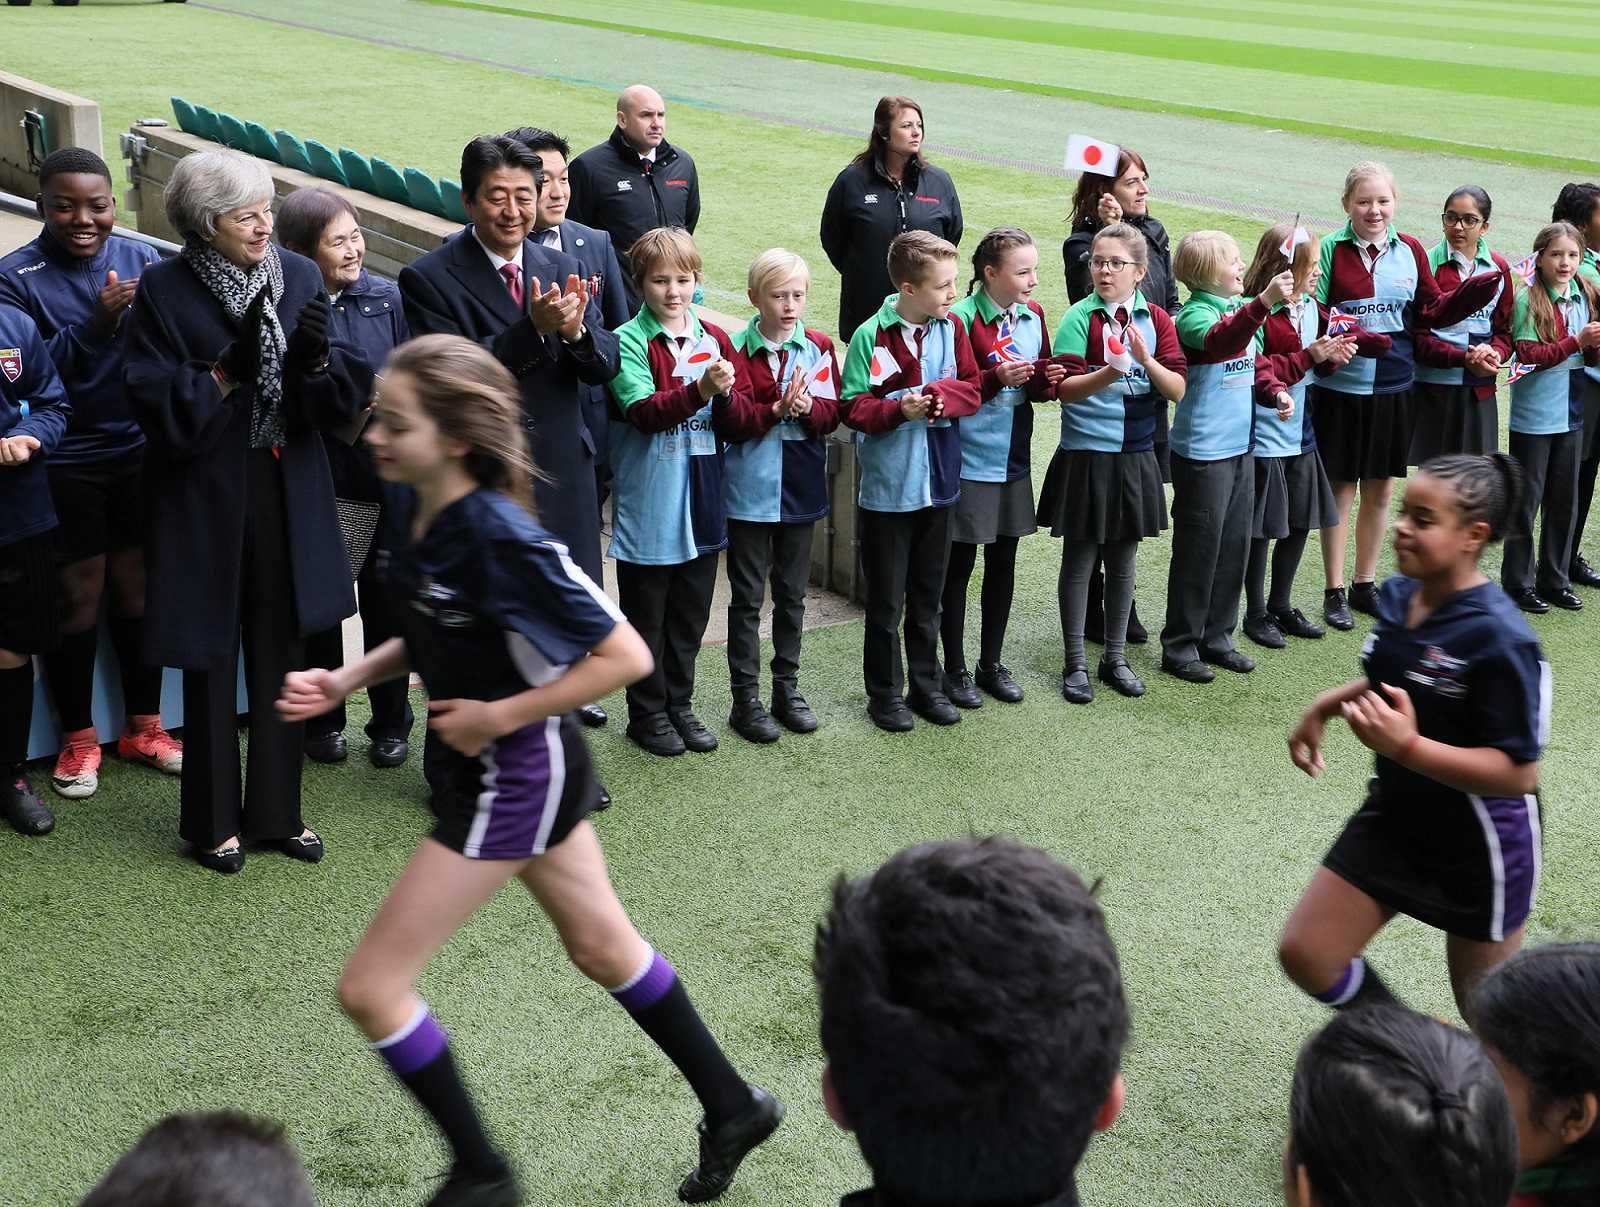 Photograph of the Prime Minister attending a children’s rugby tournament